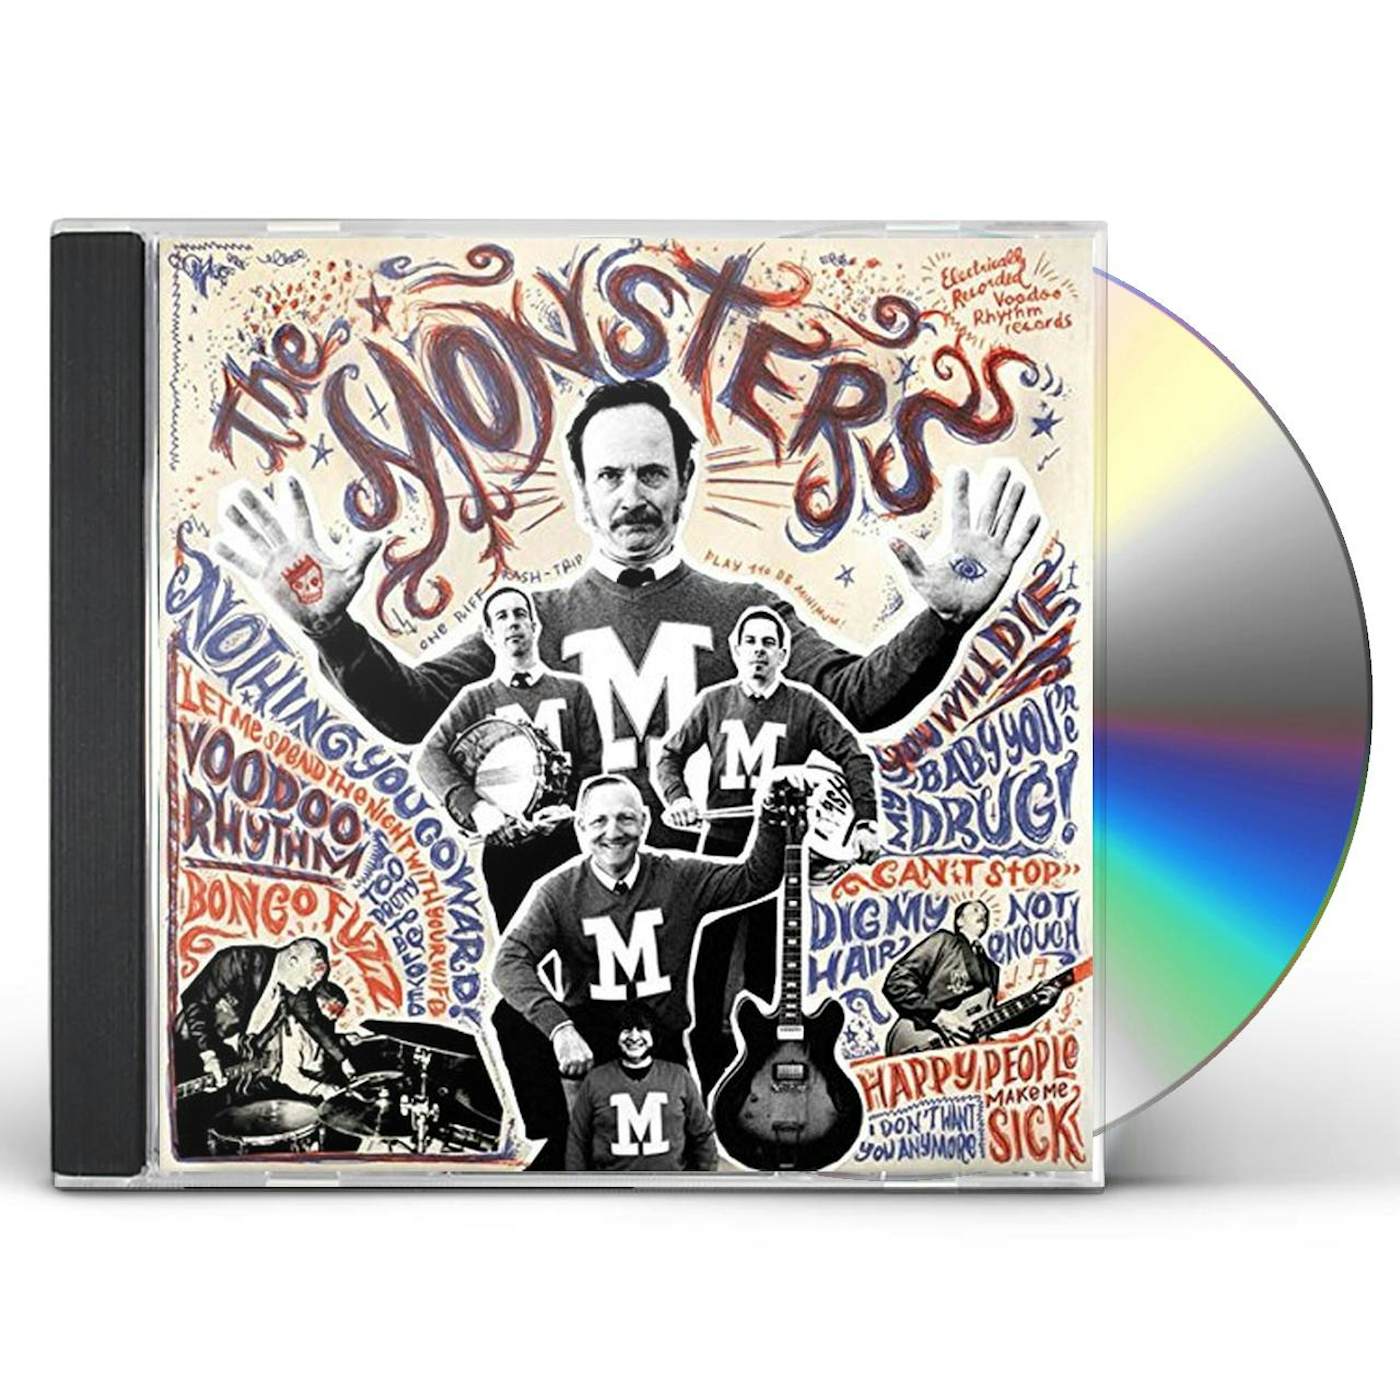 The Monsters M CD